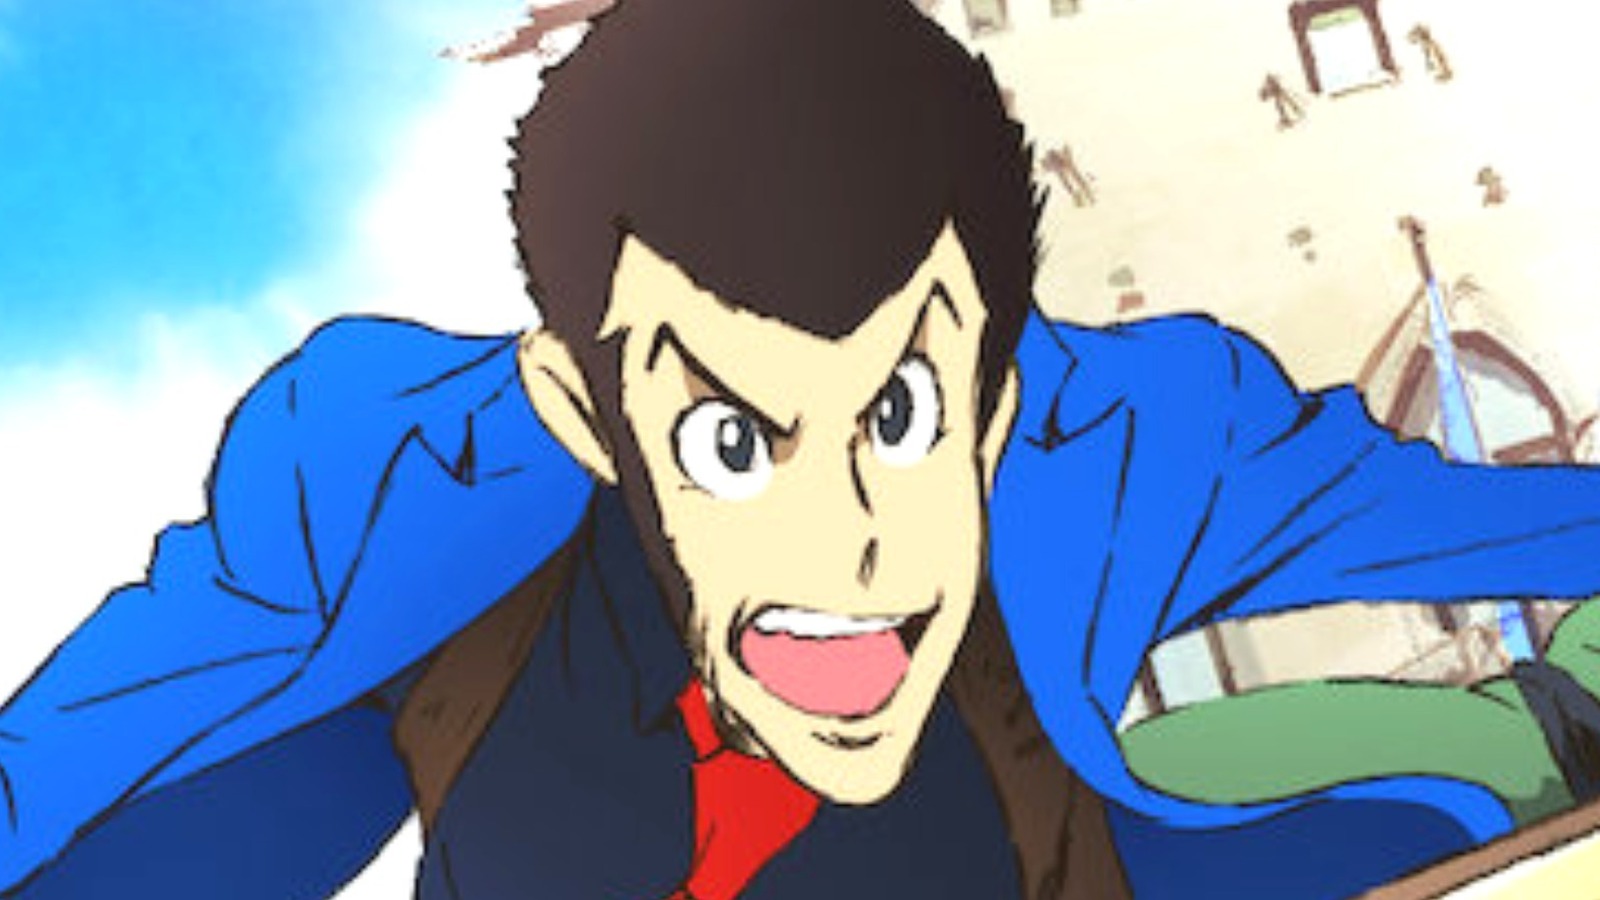 Lupin III: Part VI - What We Know So Far